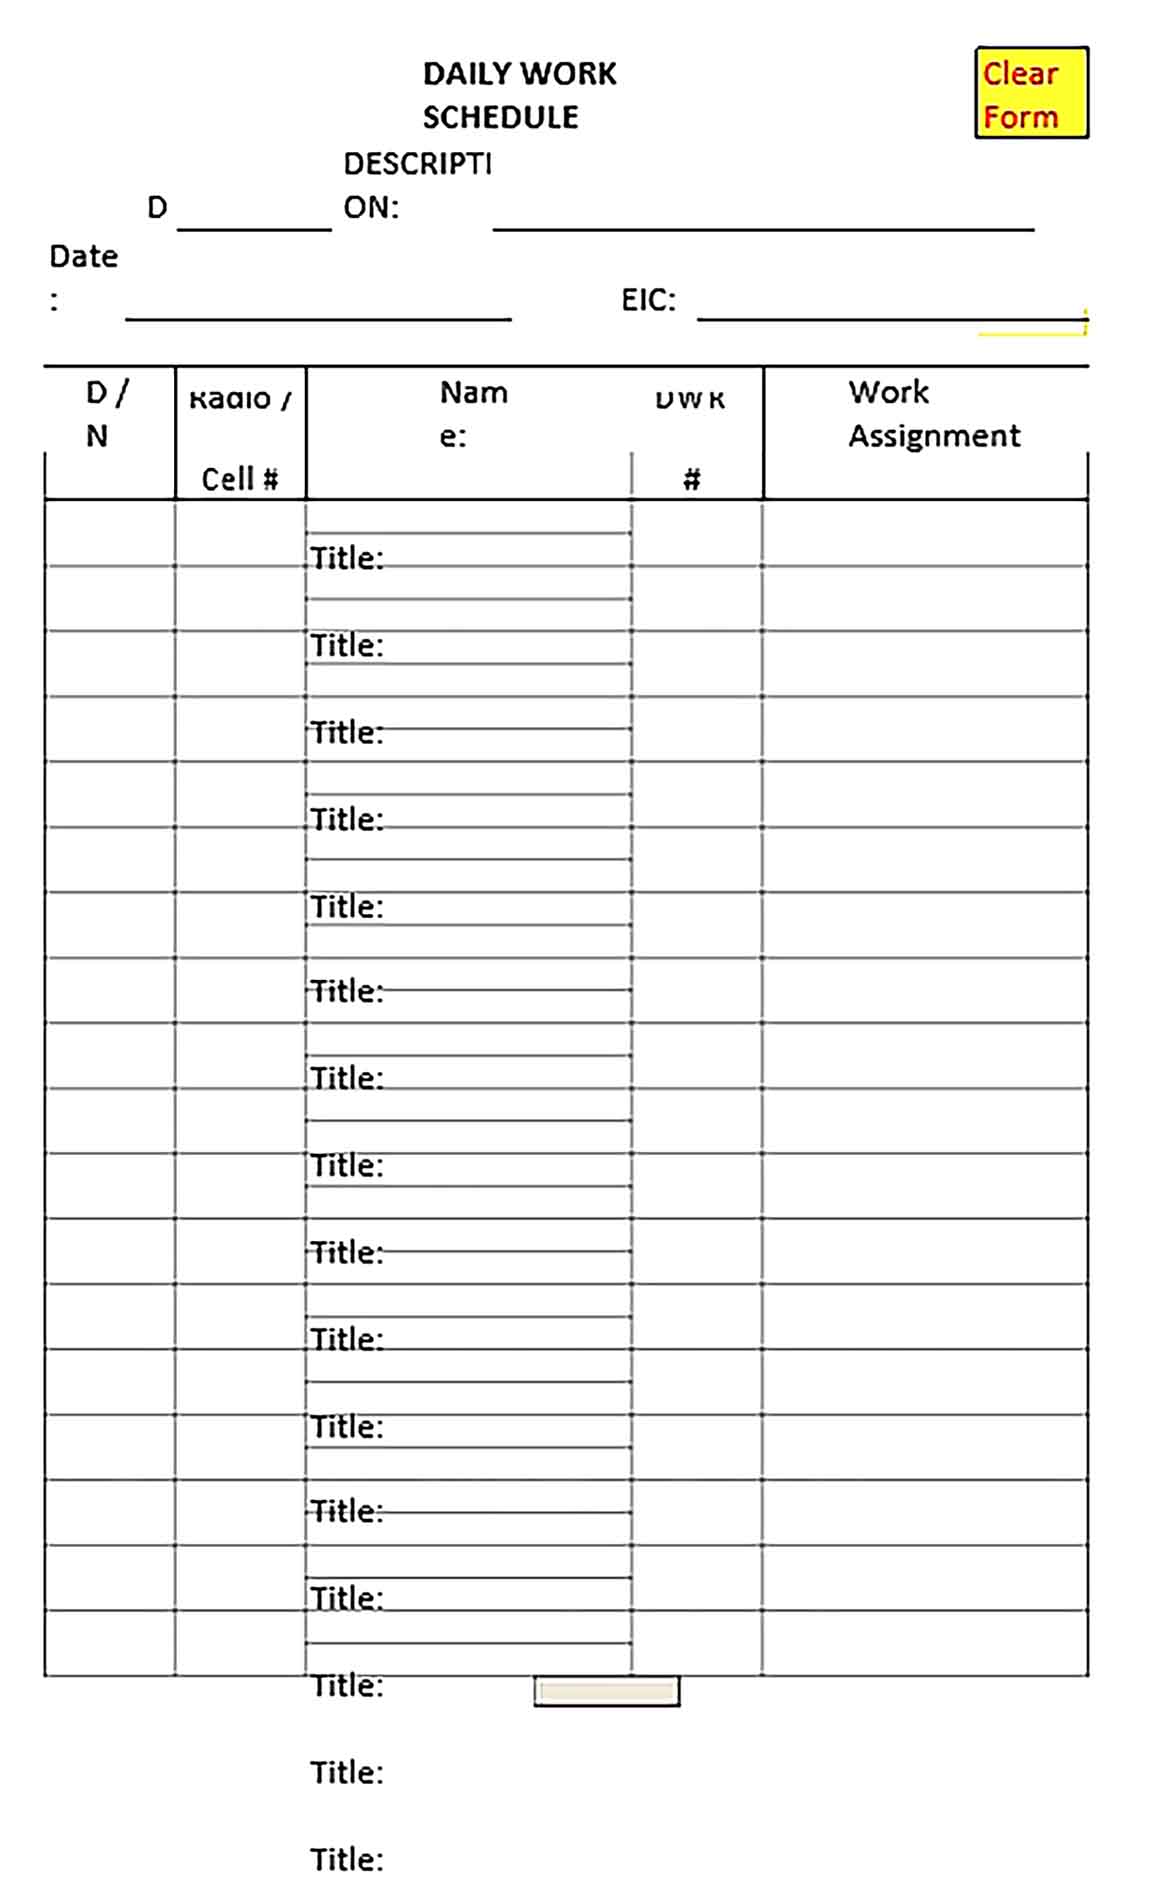 Template Daily Work Schedule Sample Copy